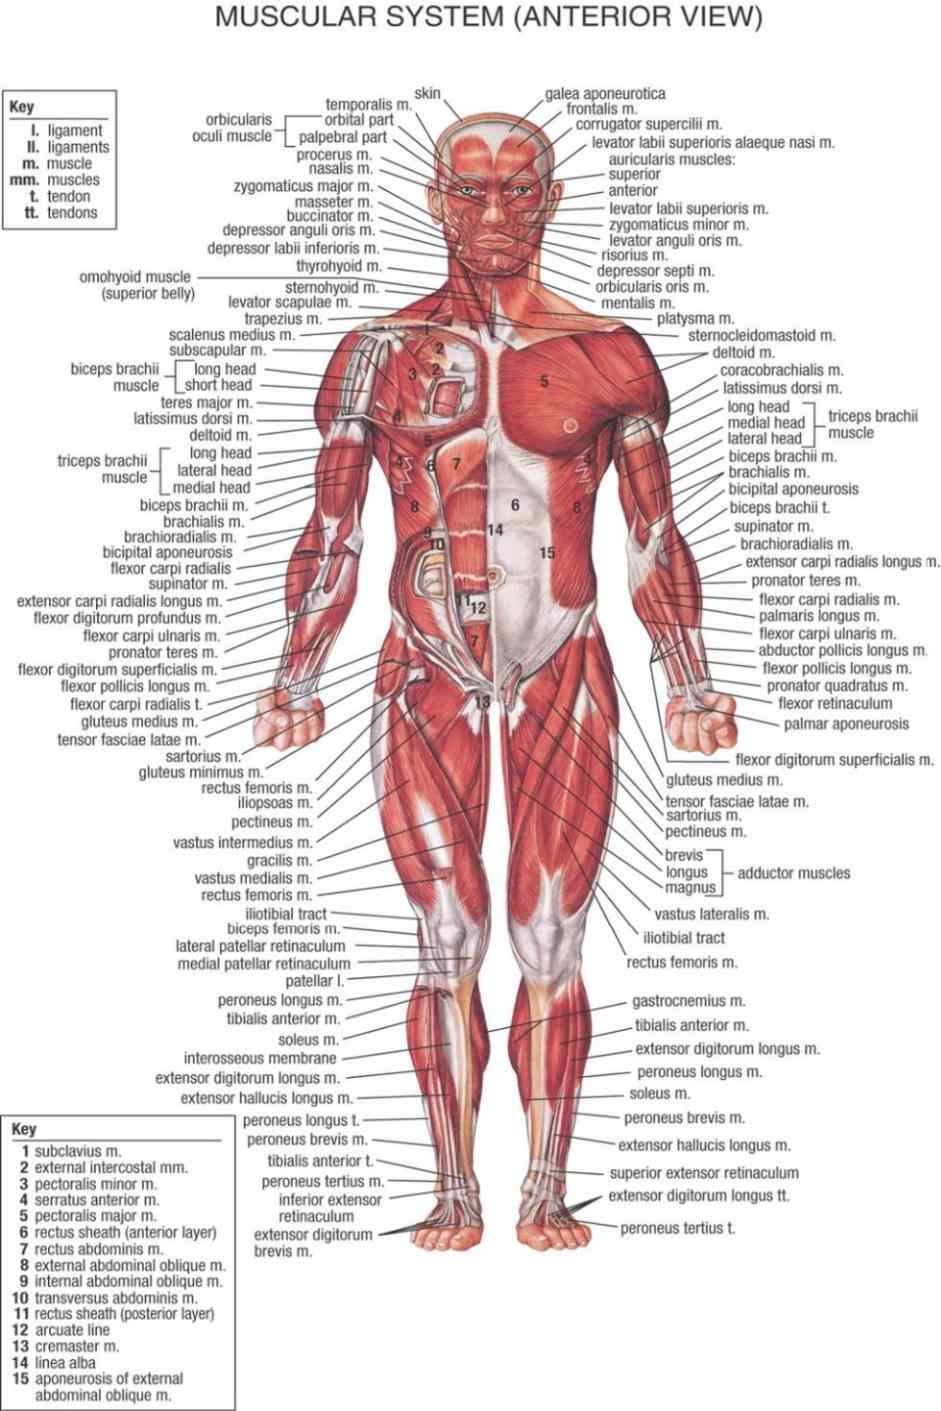 Human Body Anatomical Chart Muscular System Watercolor inkjet Watercolor inkjet Fabric poster 36 x 24 20x13 003. fabric posters. muscular systemmuscular system poster